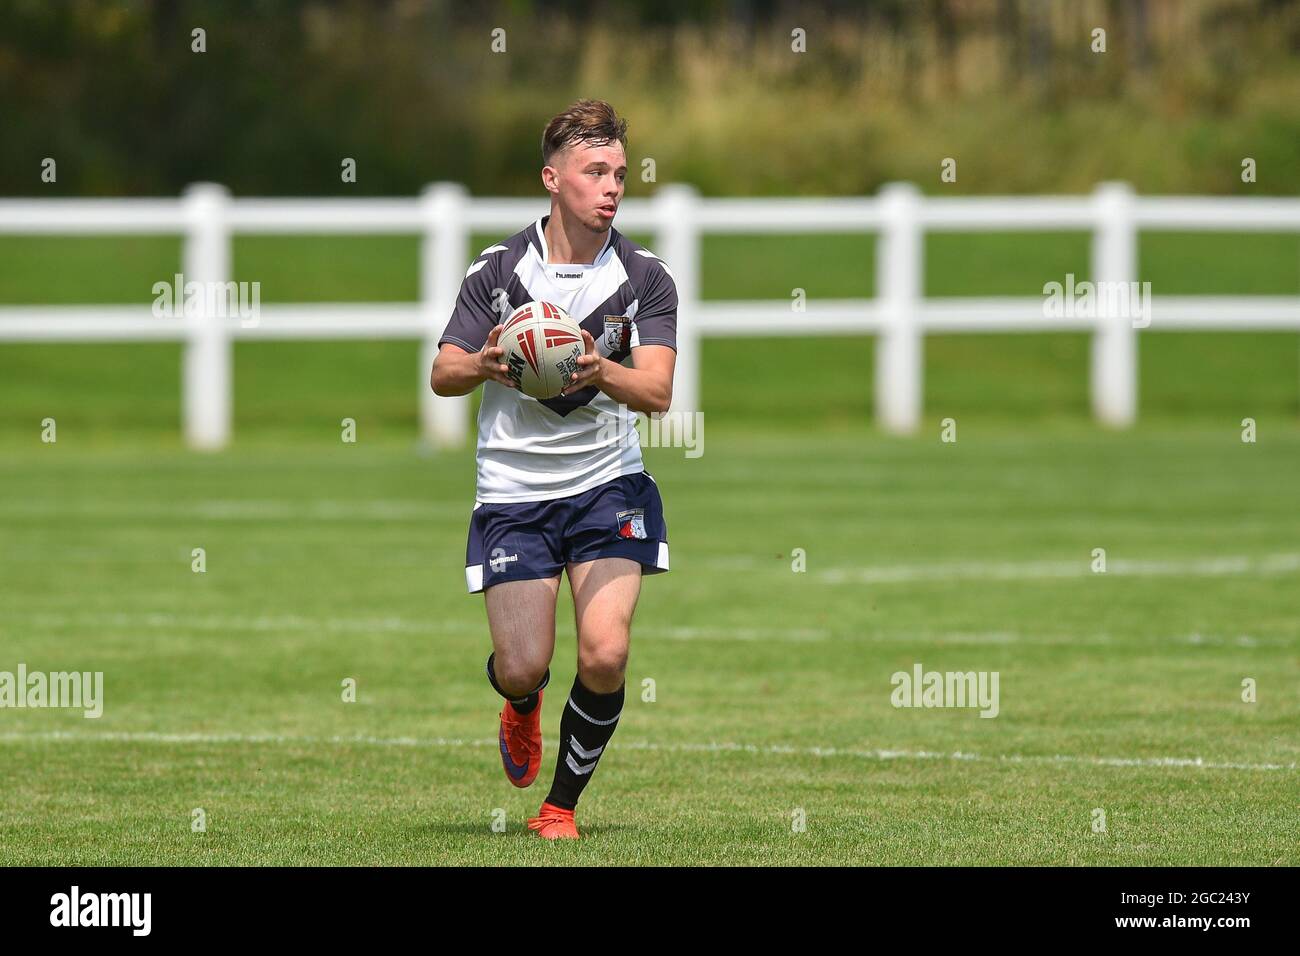 Leeds, England - 4 August 2021 - Lewis Camden (Bradford Bulls) of Yorkshire Academy during the Rugby League Roses Academy Match Yorkshire Academy vs Lancashire Academy at Weetwood Hall, Leeds, UK  Dean Williams Stock Photo